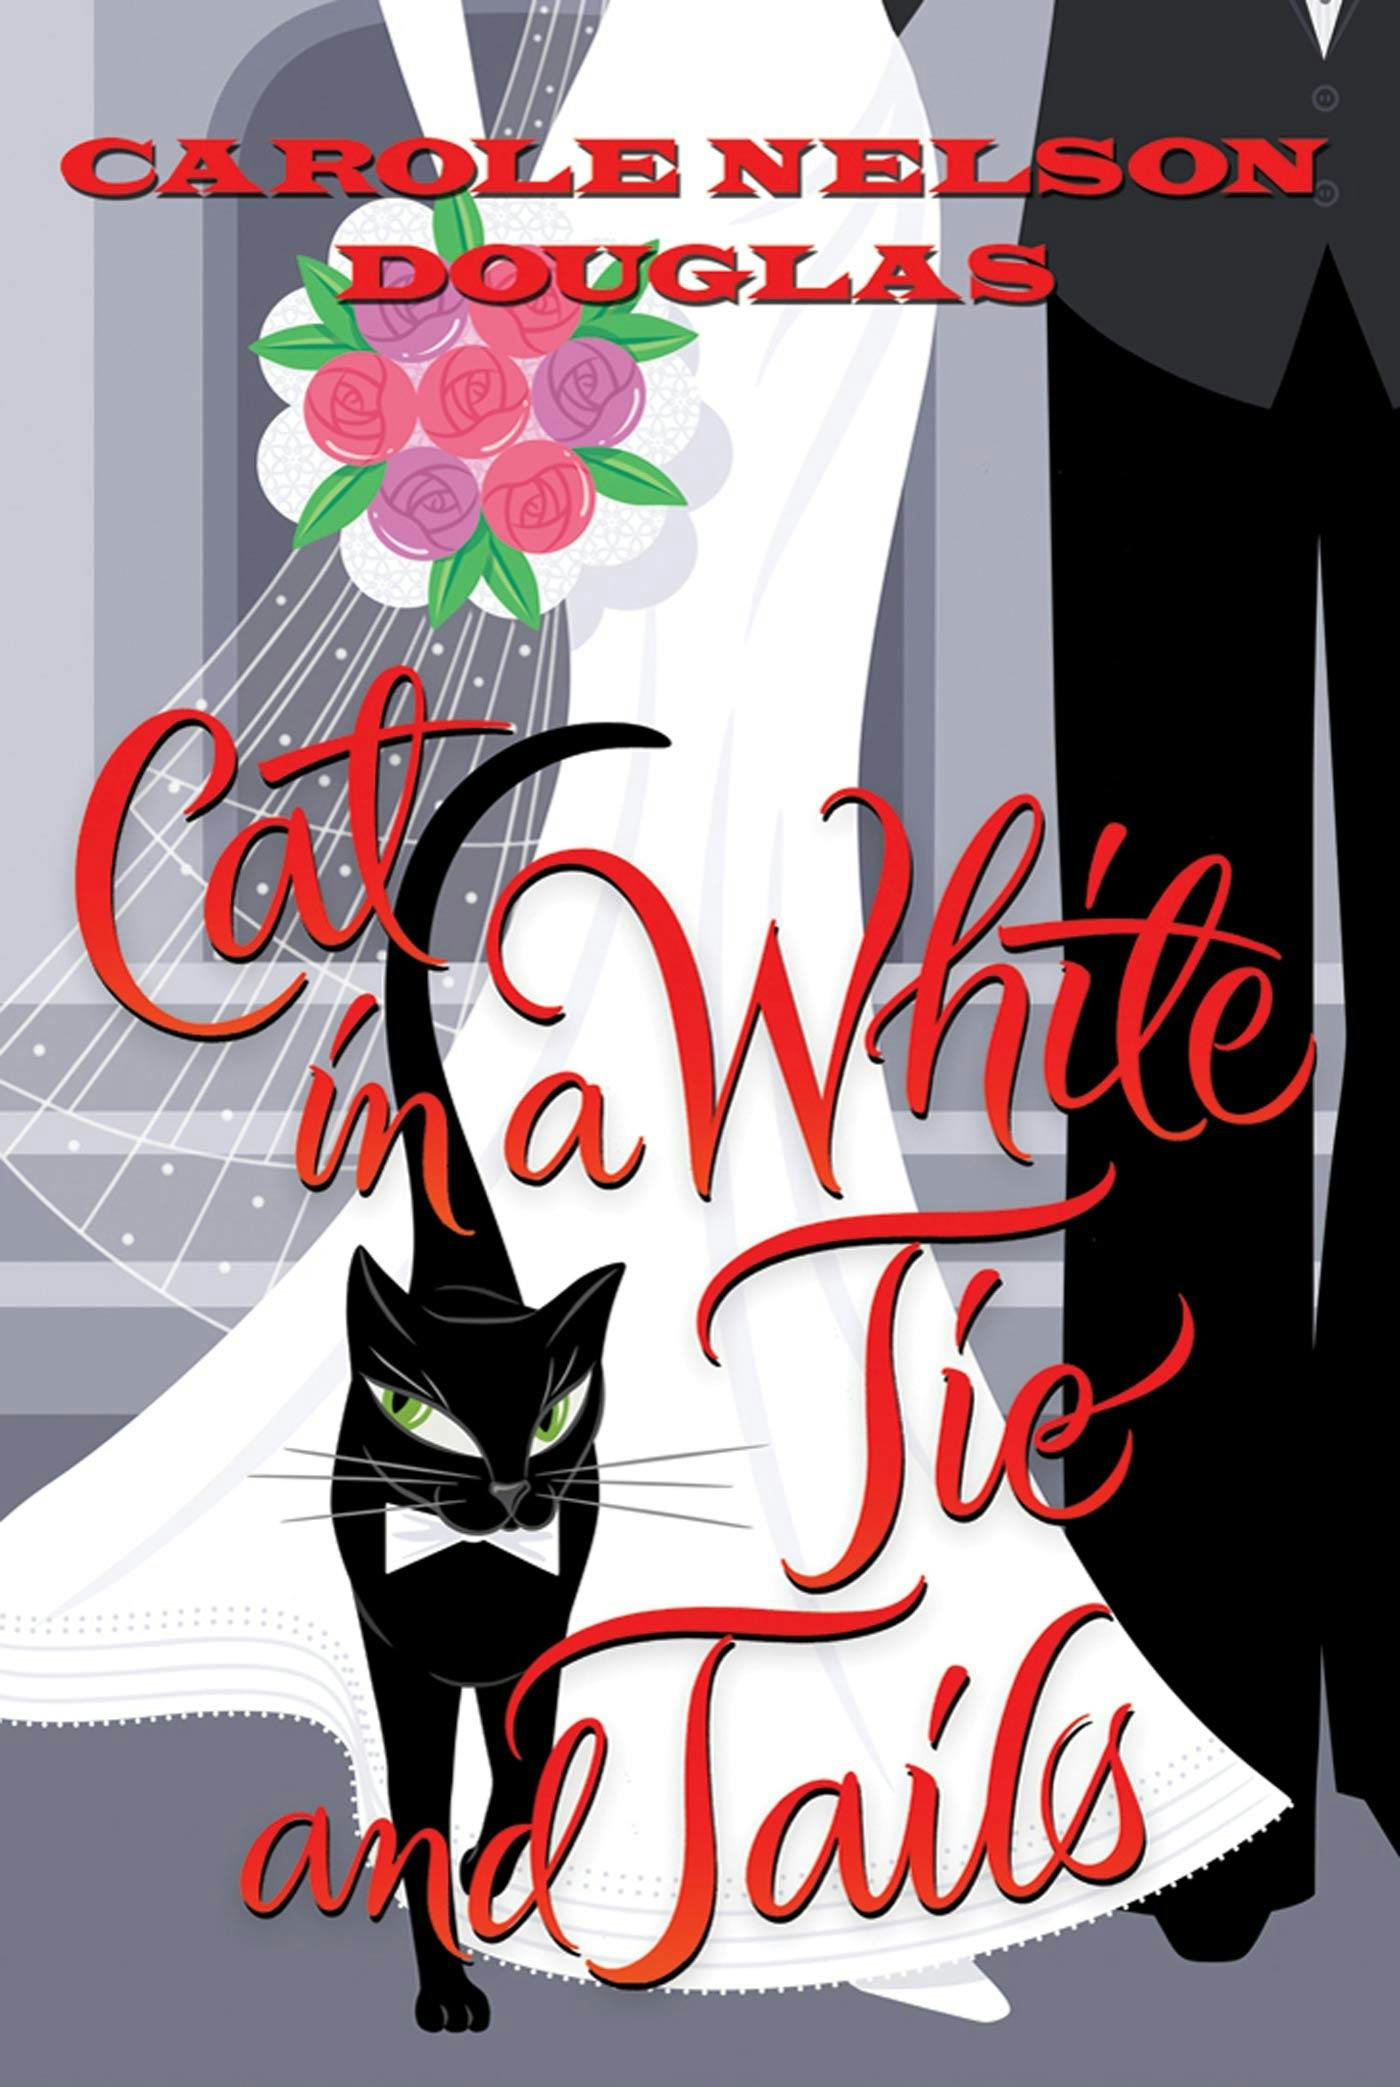 Cover for the book titled as: Cat in a White Tie and Tails